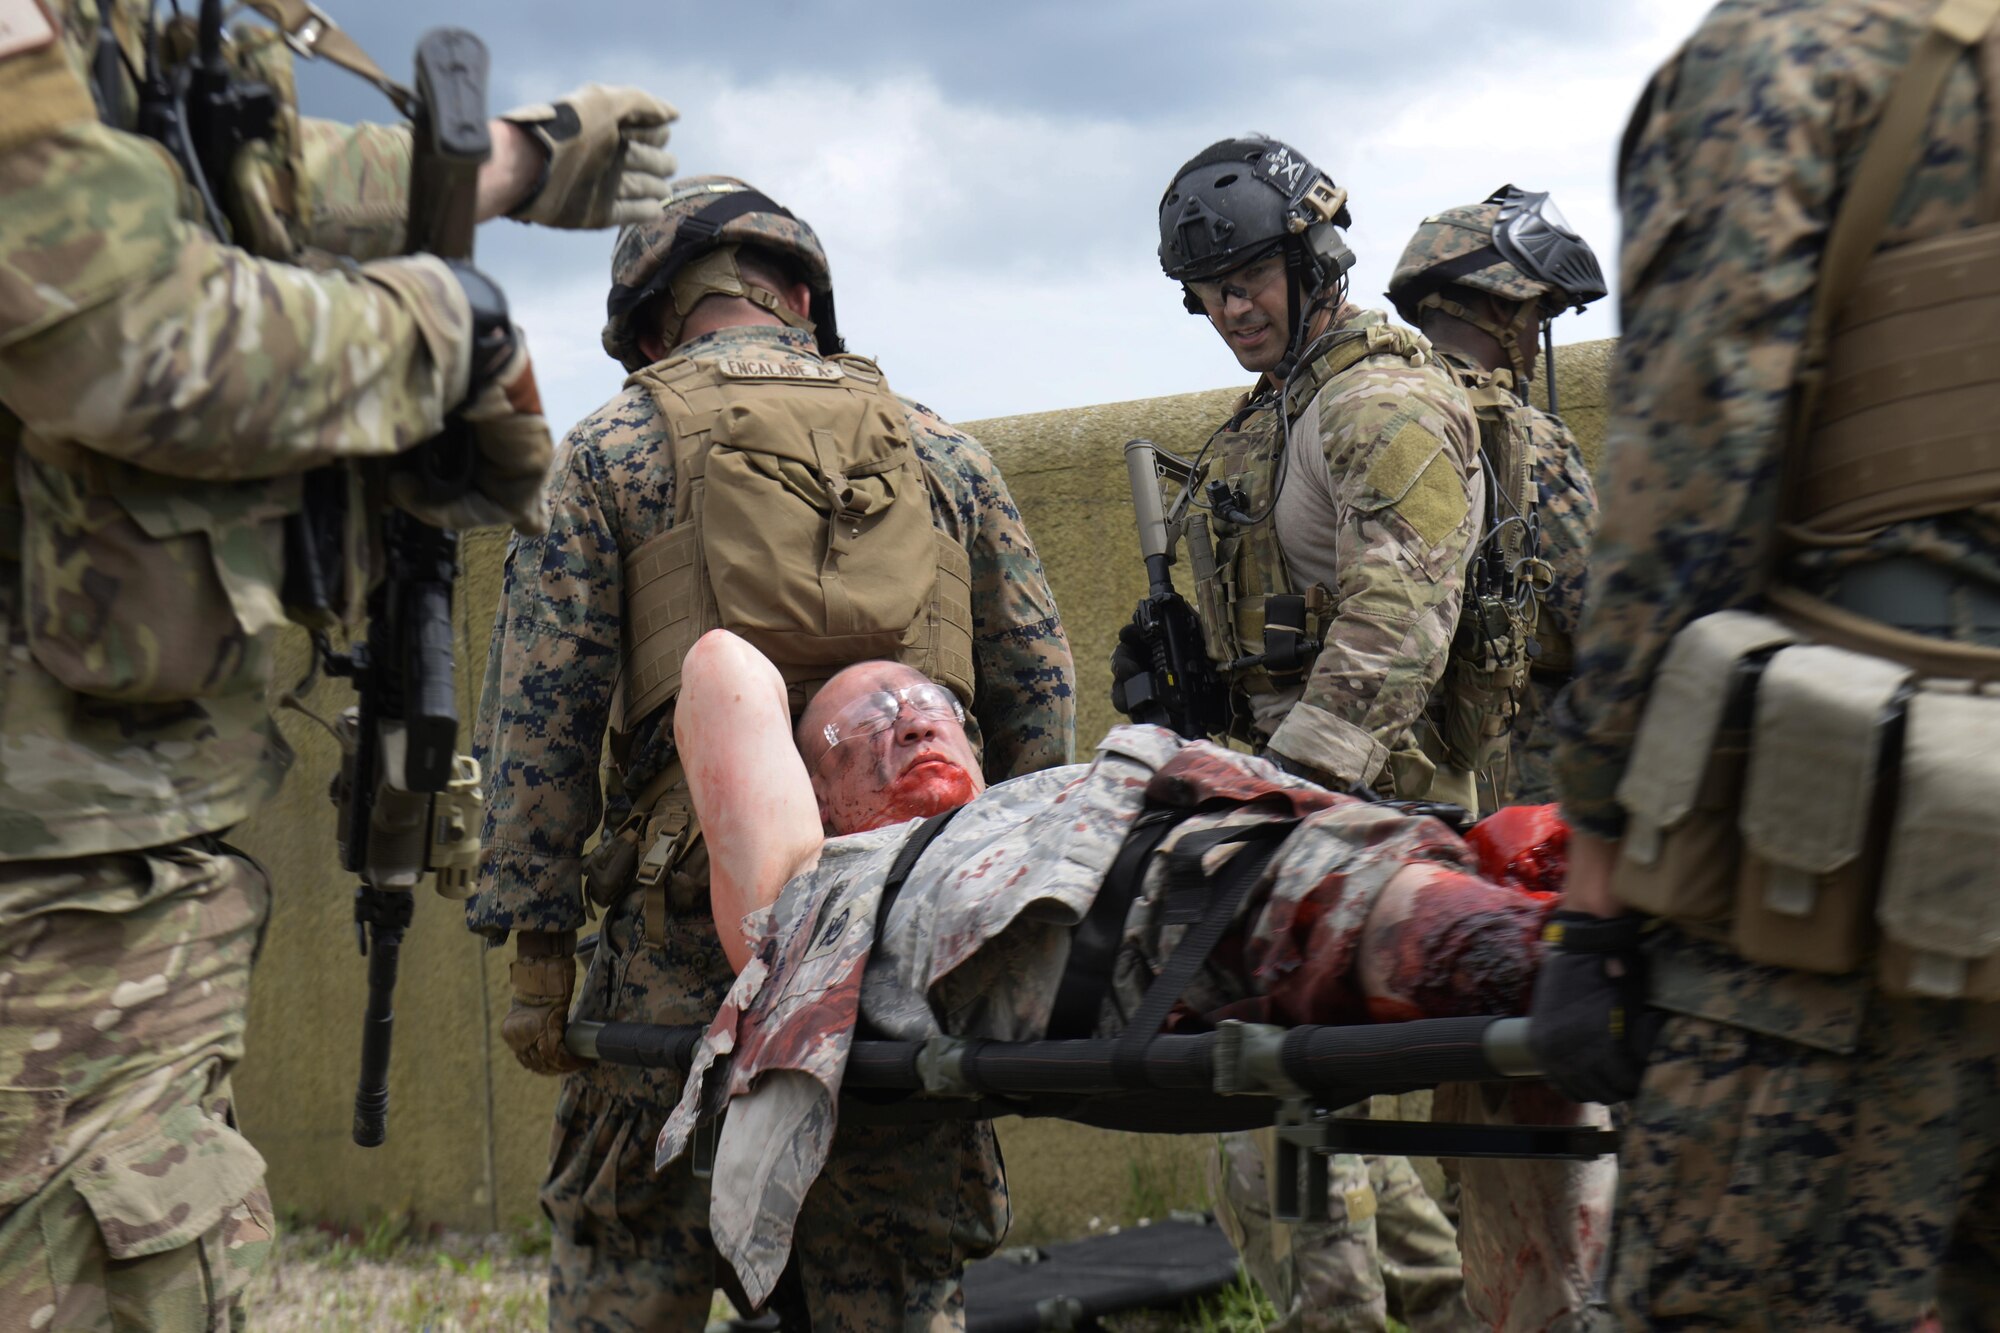 U.S. Marines assigned to the Special-Purpose Marine Air-Ground Task Force Crisis Response Africa unit carry a casualty victim on a stretcher during a joint training exercise at Stanford Training Area, England, June 14. British amputees volunteered as wounded service members to add realism to the training scenarios. (U.S. Air Force photo/Airman 1st Class Abby L. Finkel)